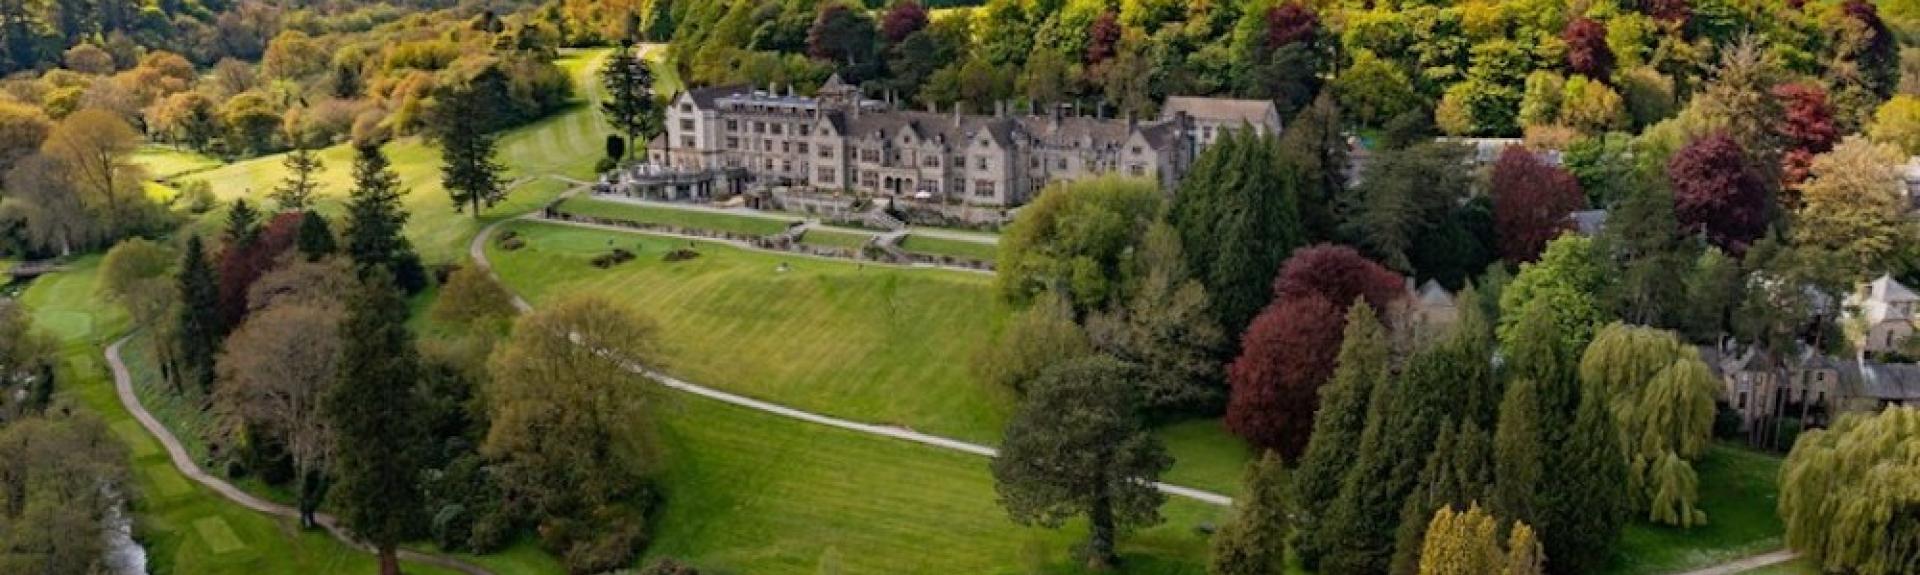 Aerial view of a large country house hotel in Devon surrounded by woods and fields on the edge of Datrmoor.